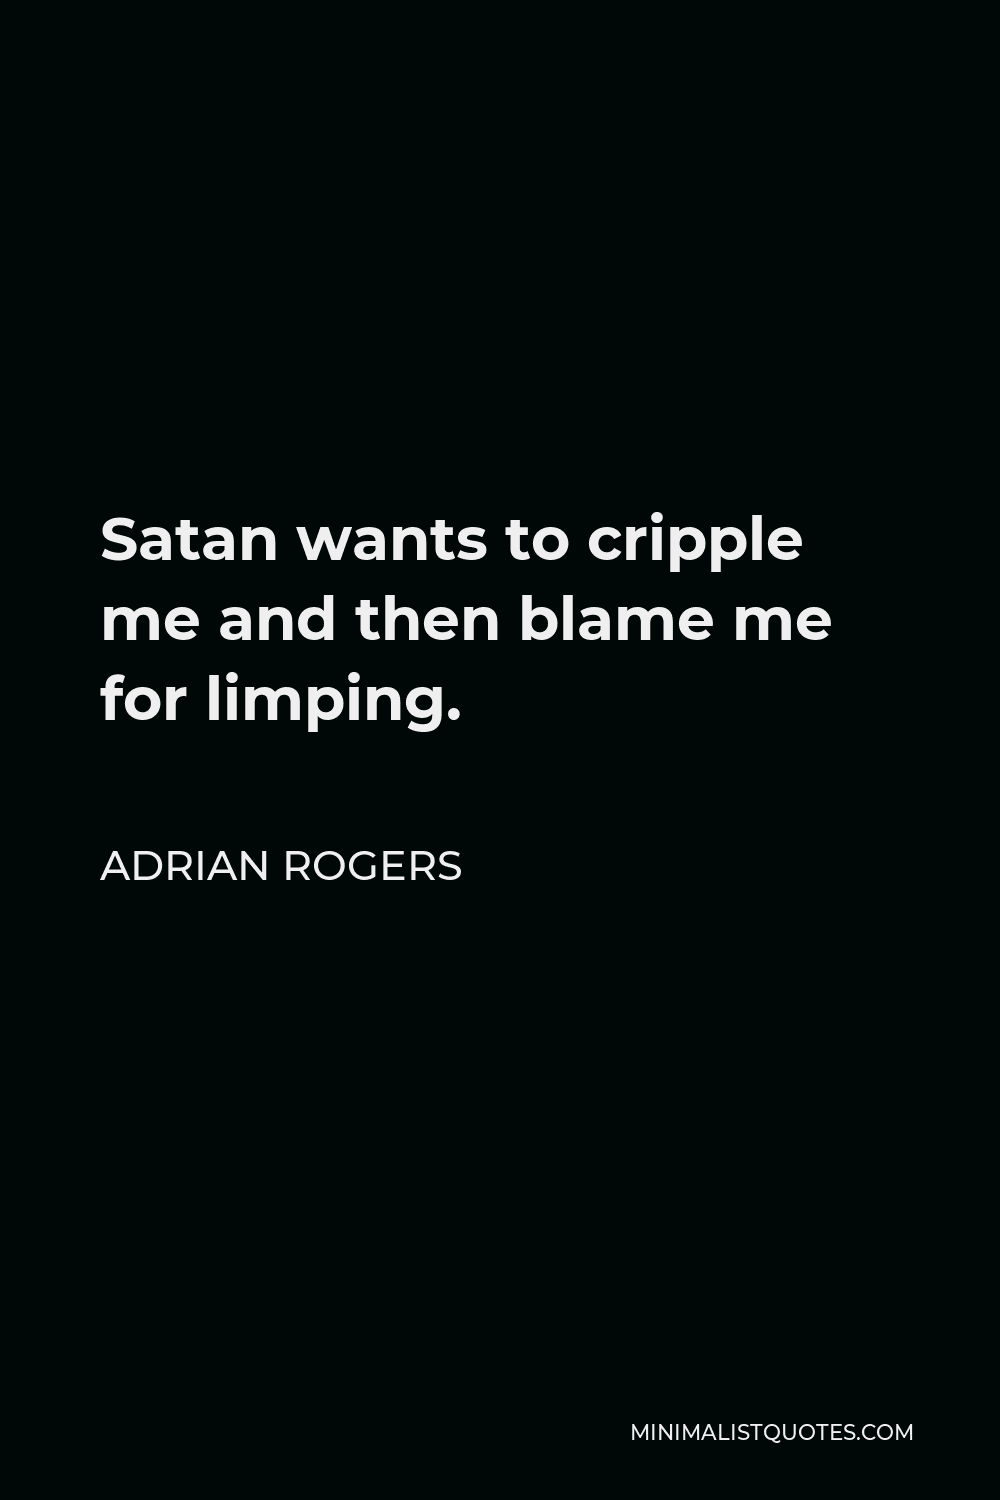 Adrian Rogers Quote - Satan wants to cripple me and then blame me for limping.